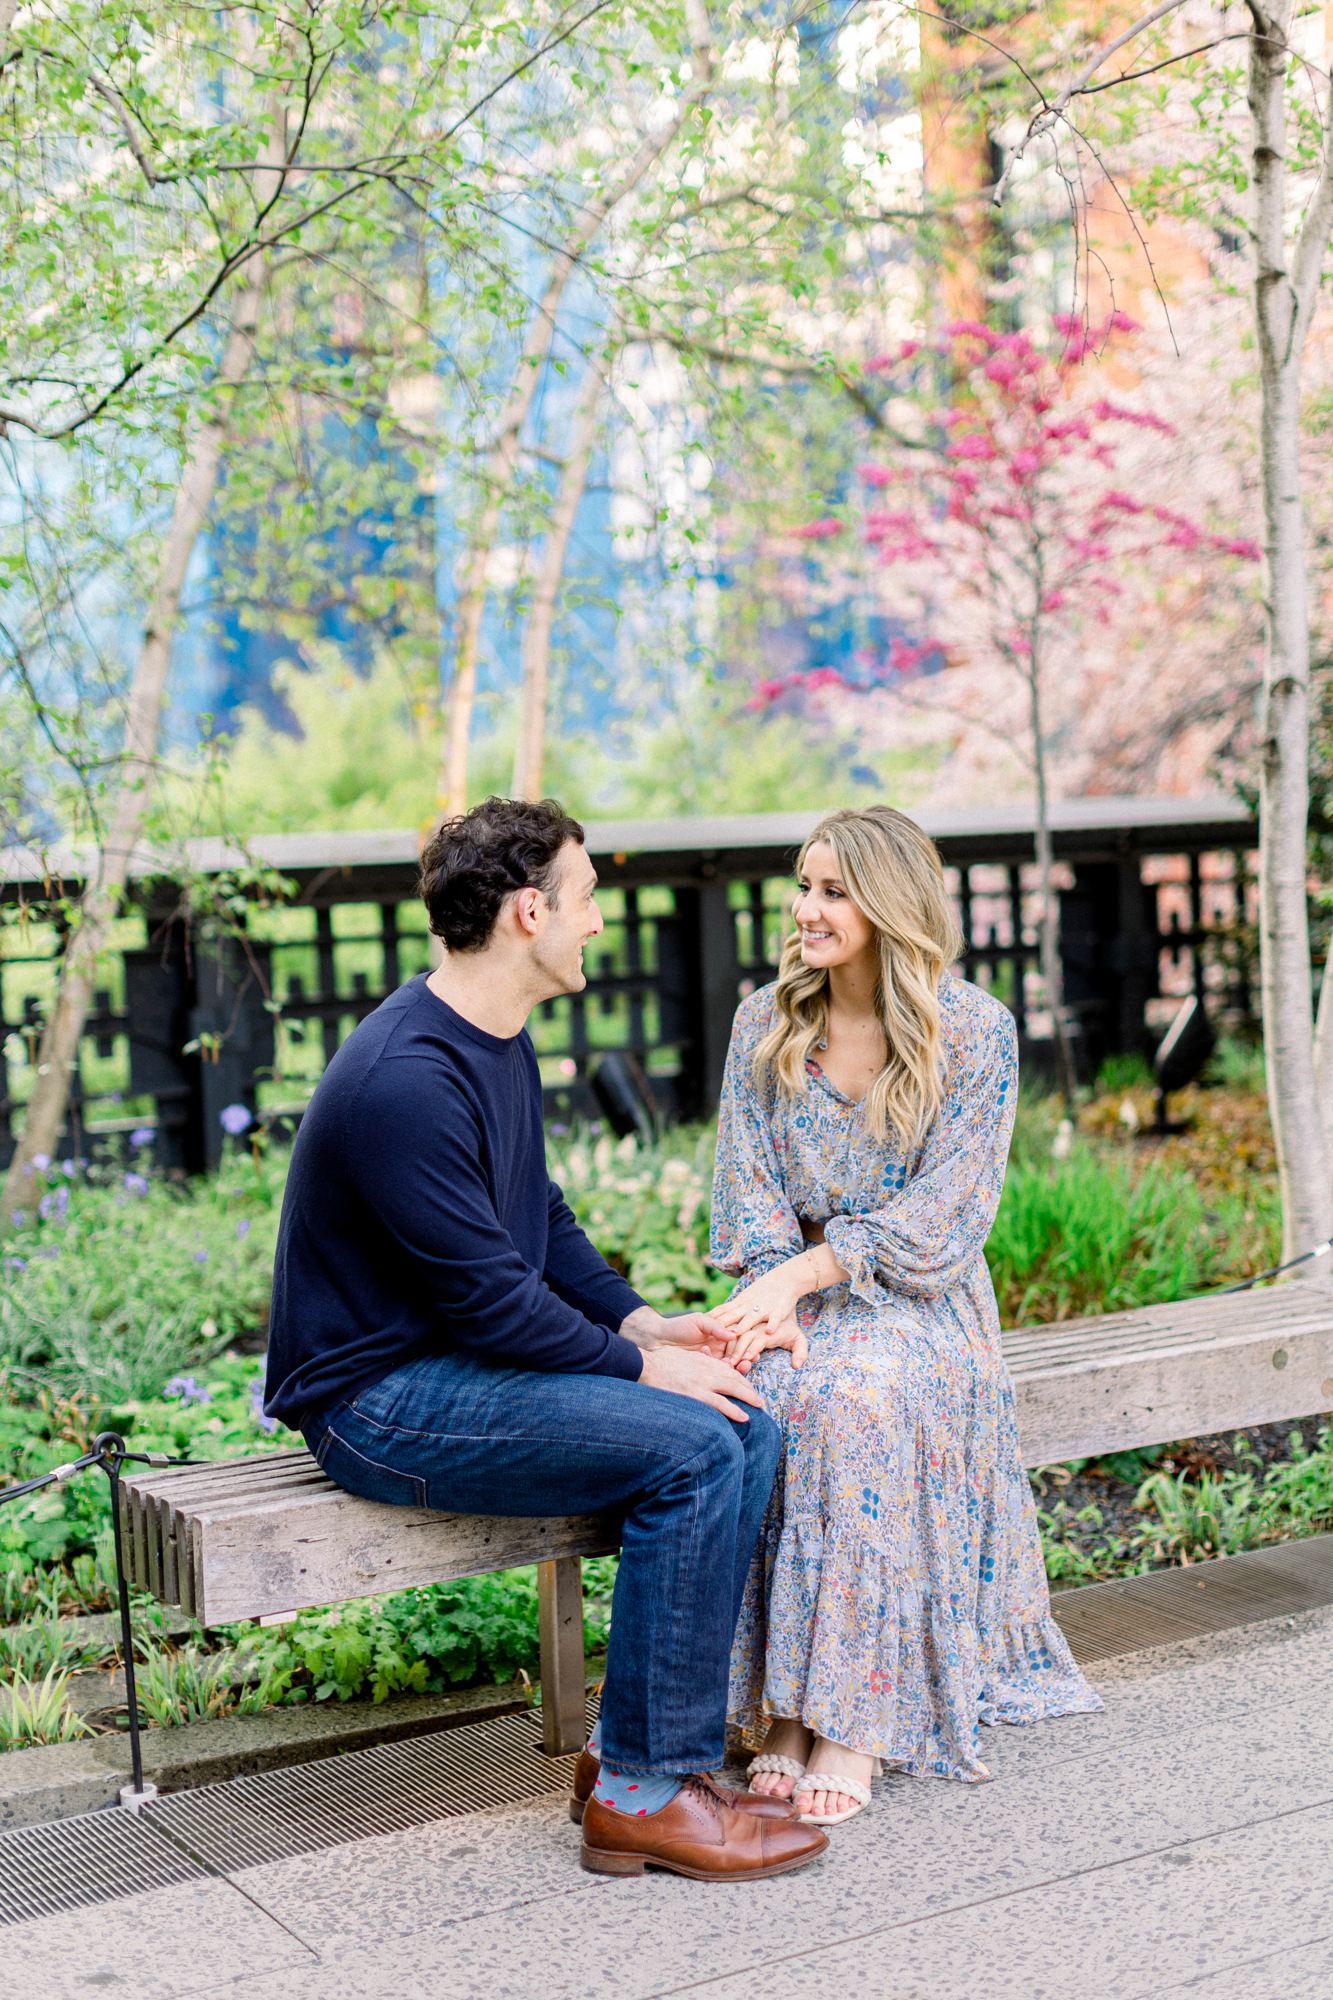 Vivid NYC Engagement Photography with Spring Blossoms